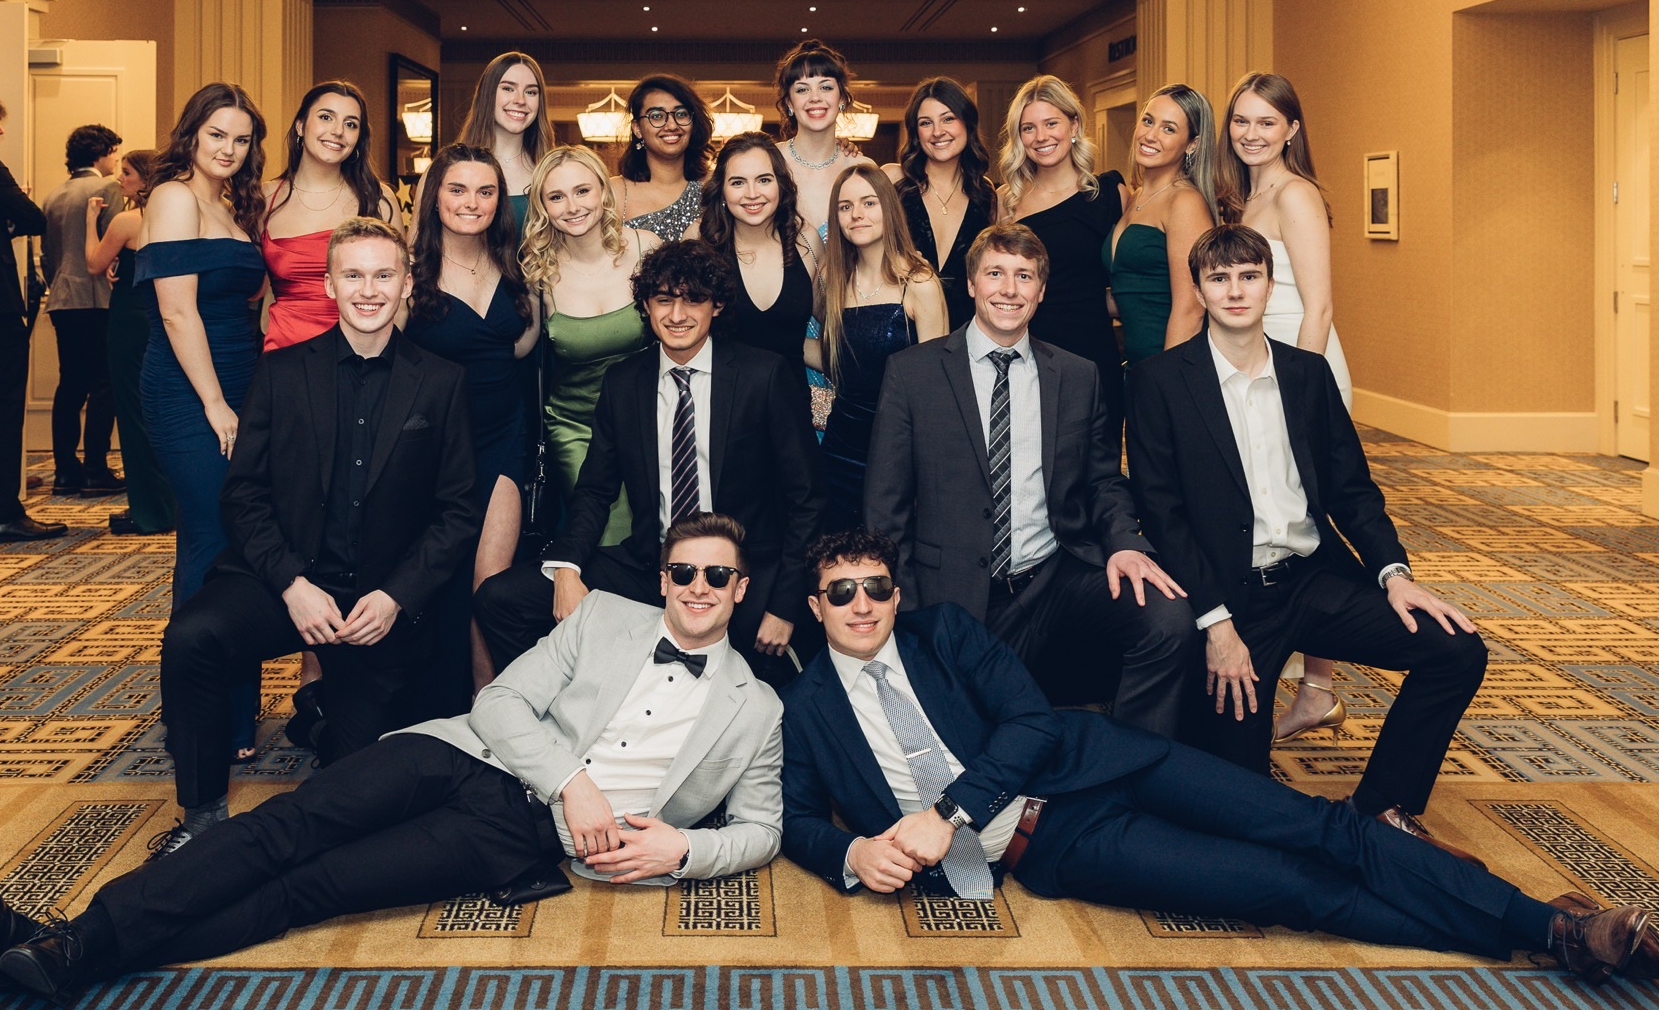 A group of students in formal attire in a hotel lobby